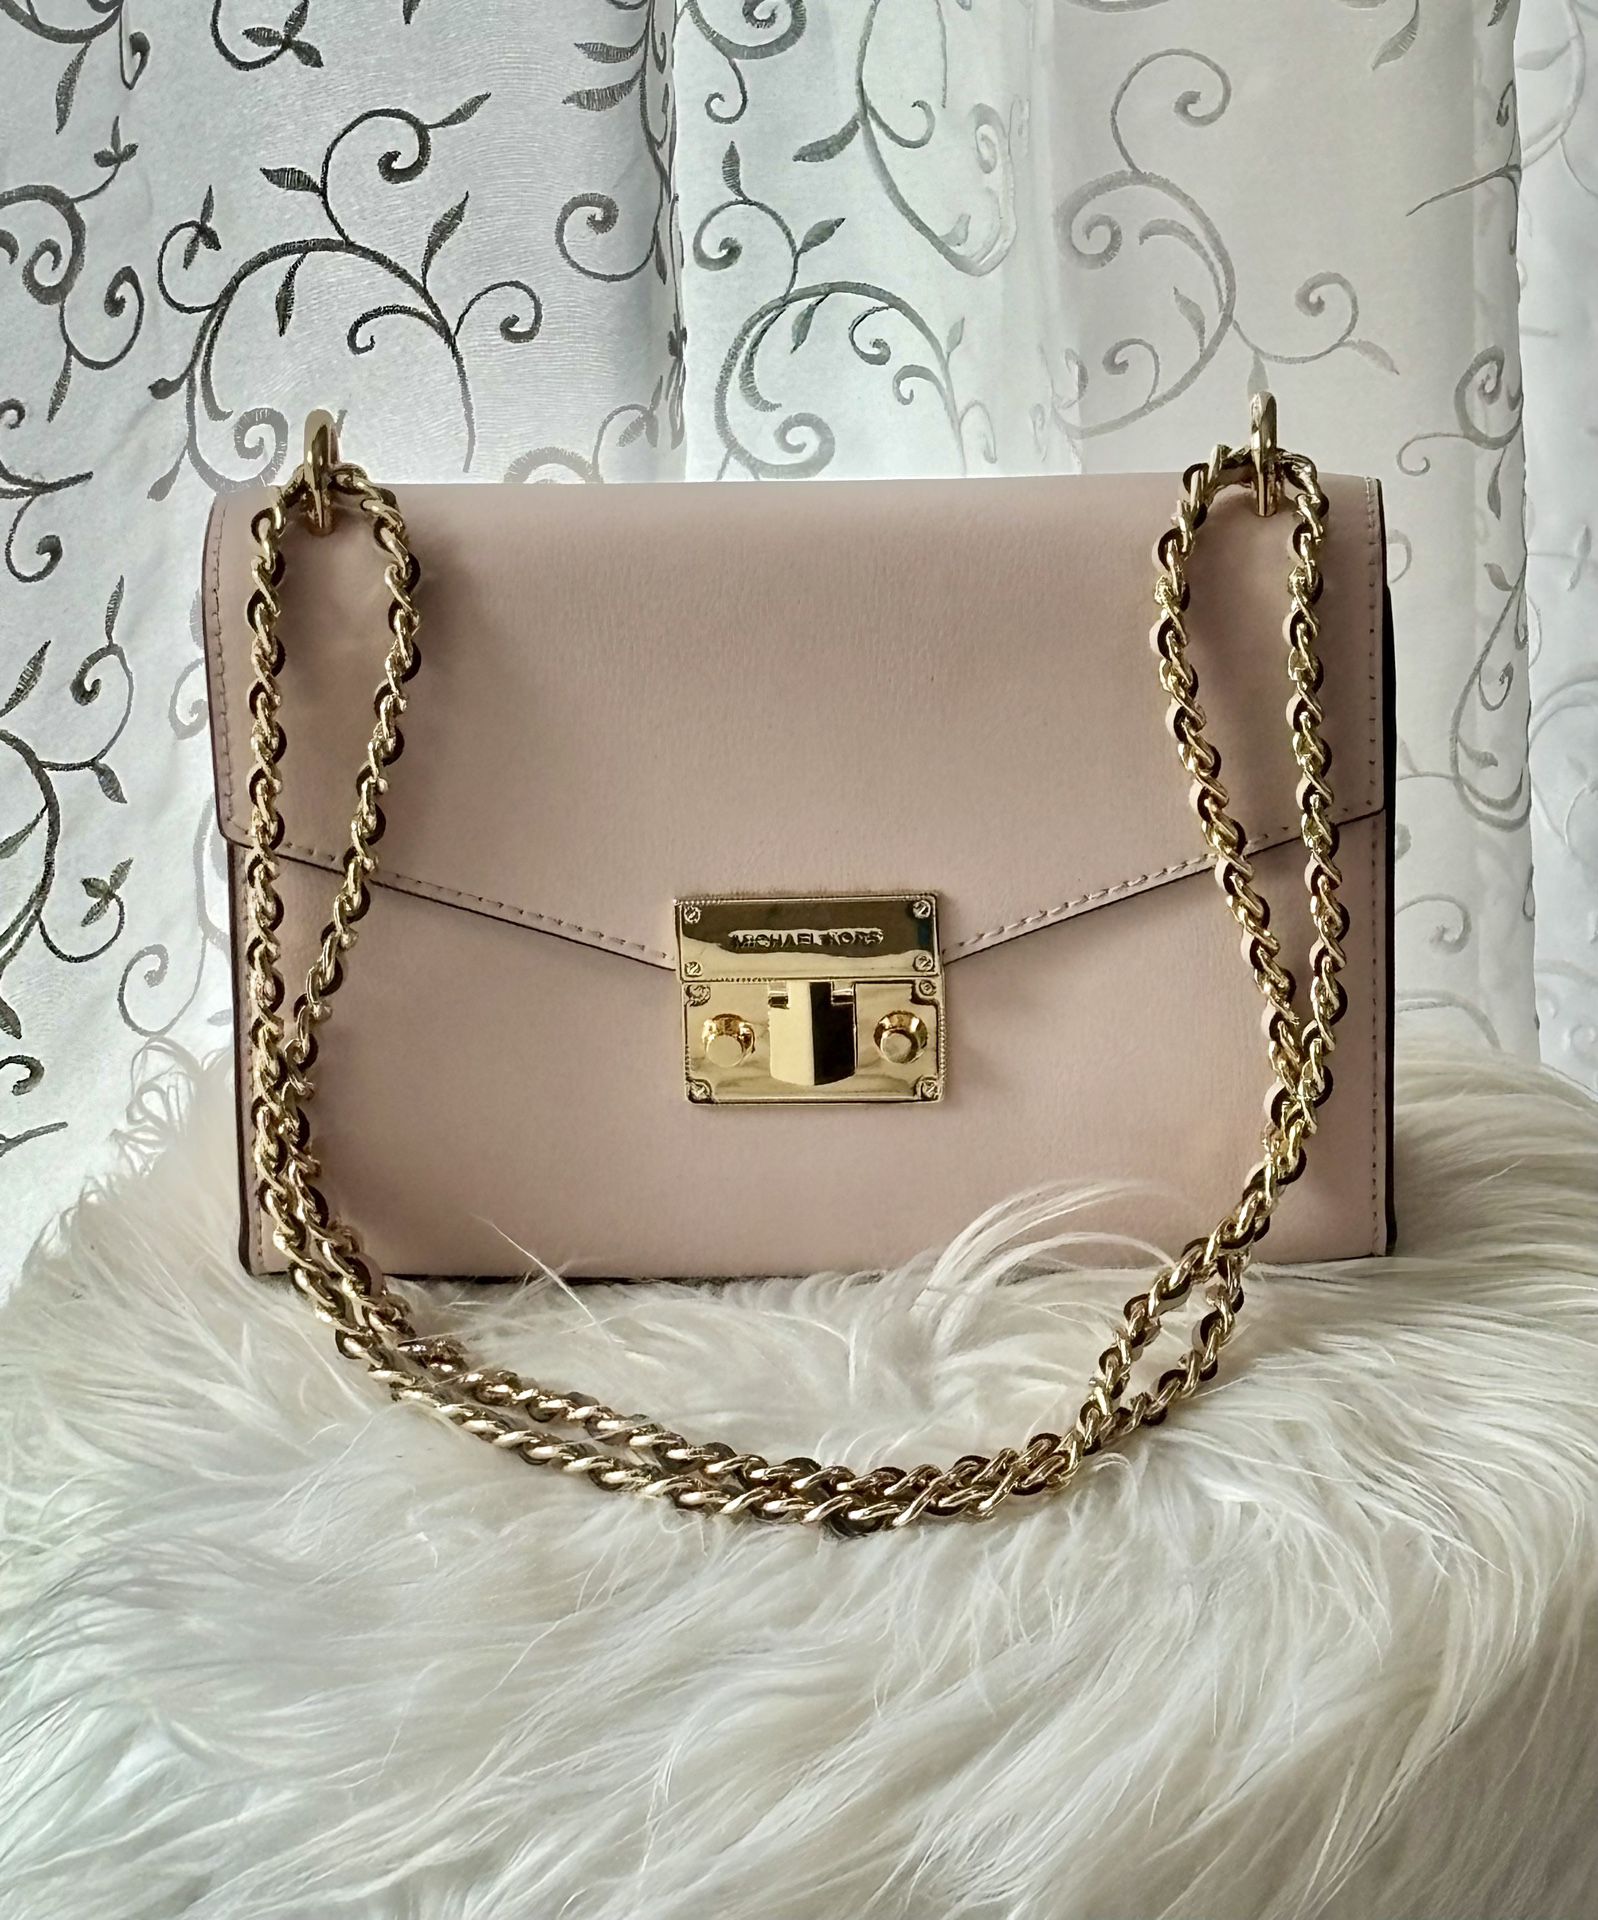 Michael Kors Rose Leather Crossbody Bag with Gold Chain